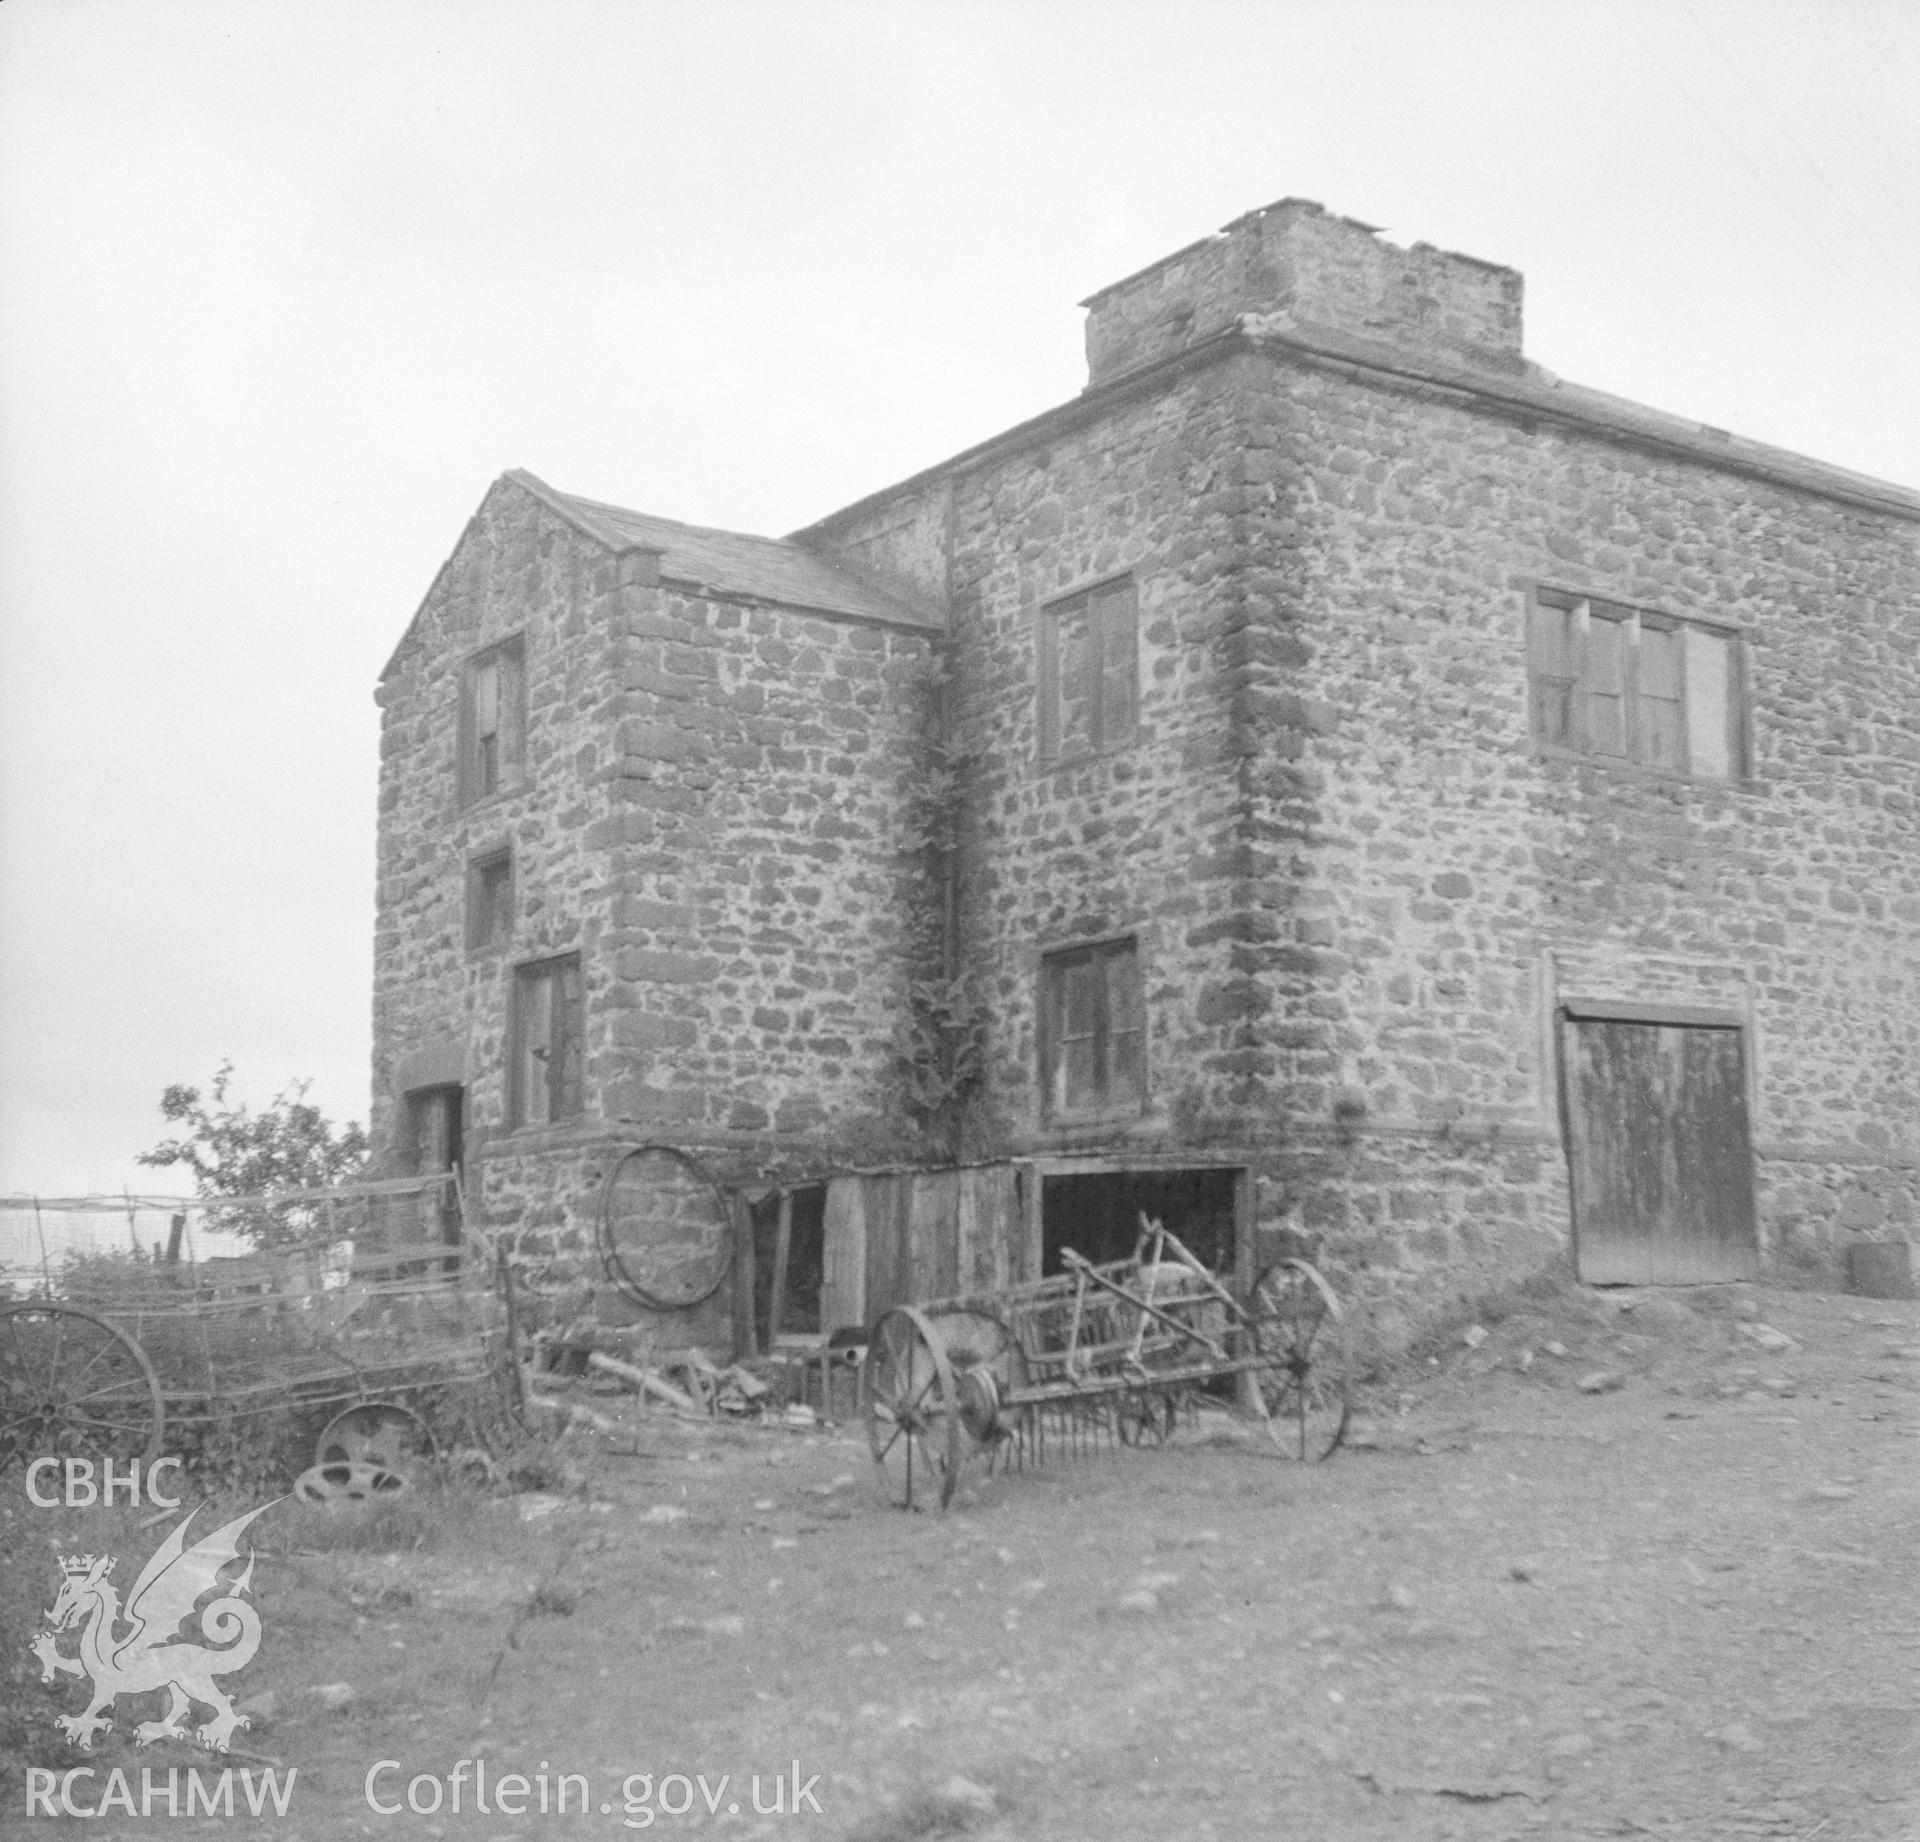 Black and white acetate negative showing exterior view with farm machinery in foreground, Trimley Hall, Llanfynydd.